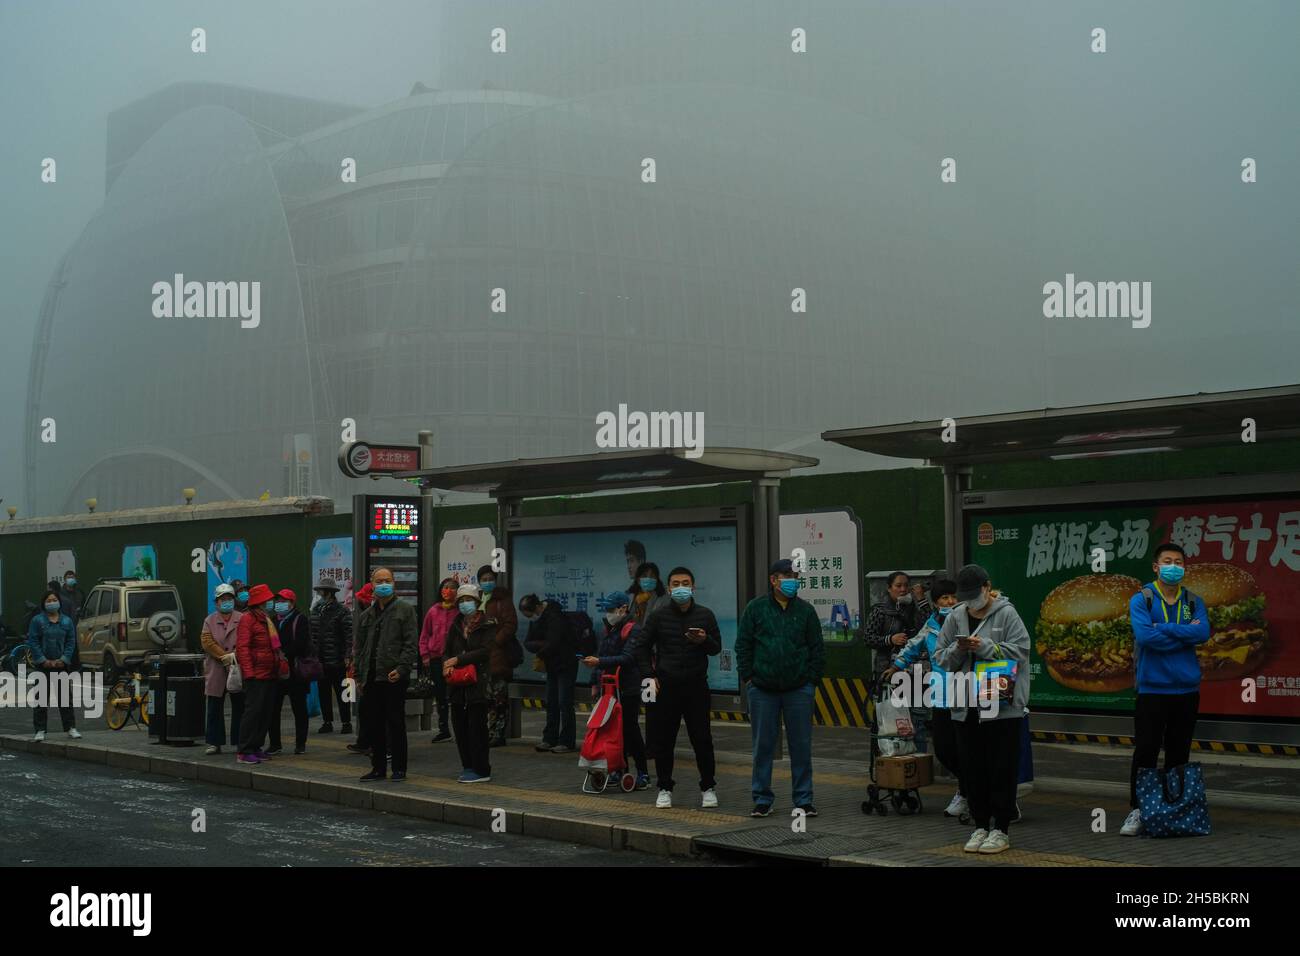 People wait for the bus in Beijing's central business district shrouded by heavy smog in Beijing, China.06-Nov-2021 Stock Photo